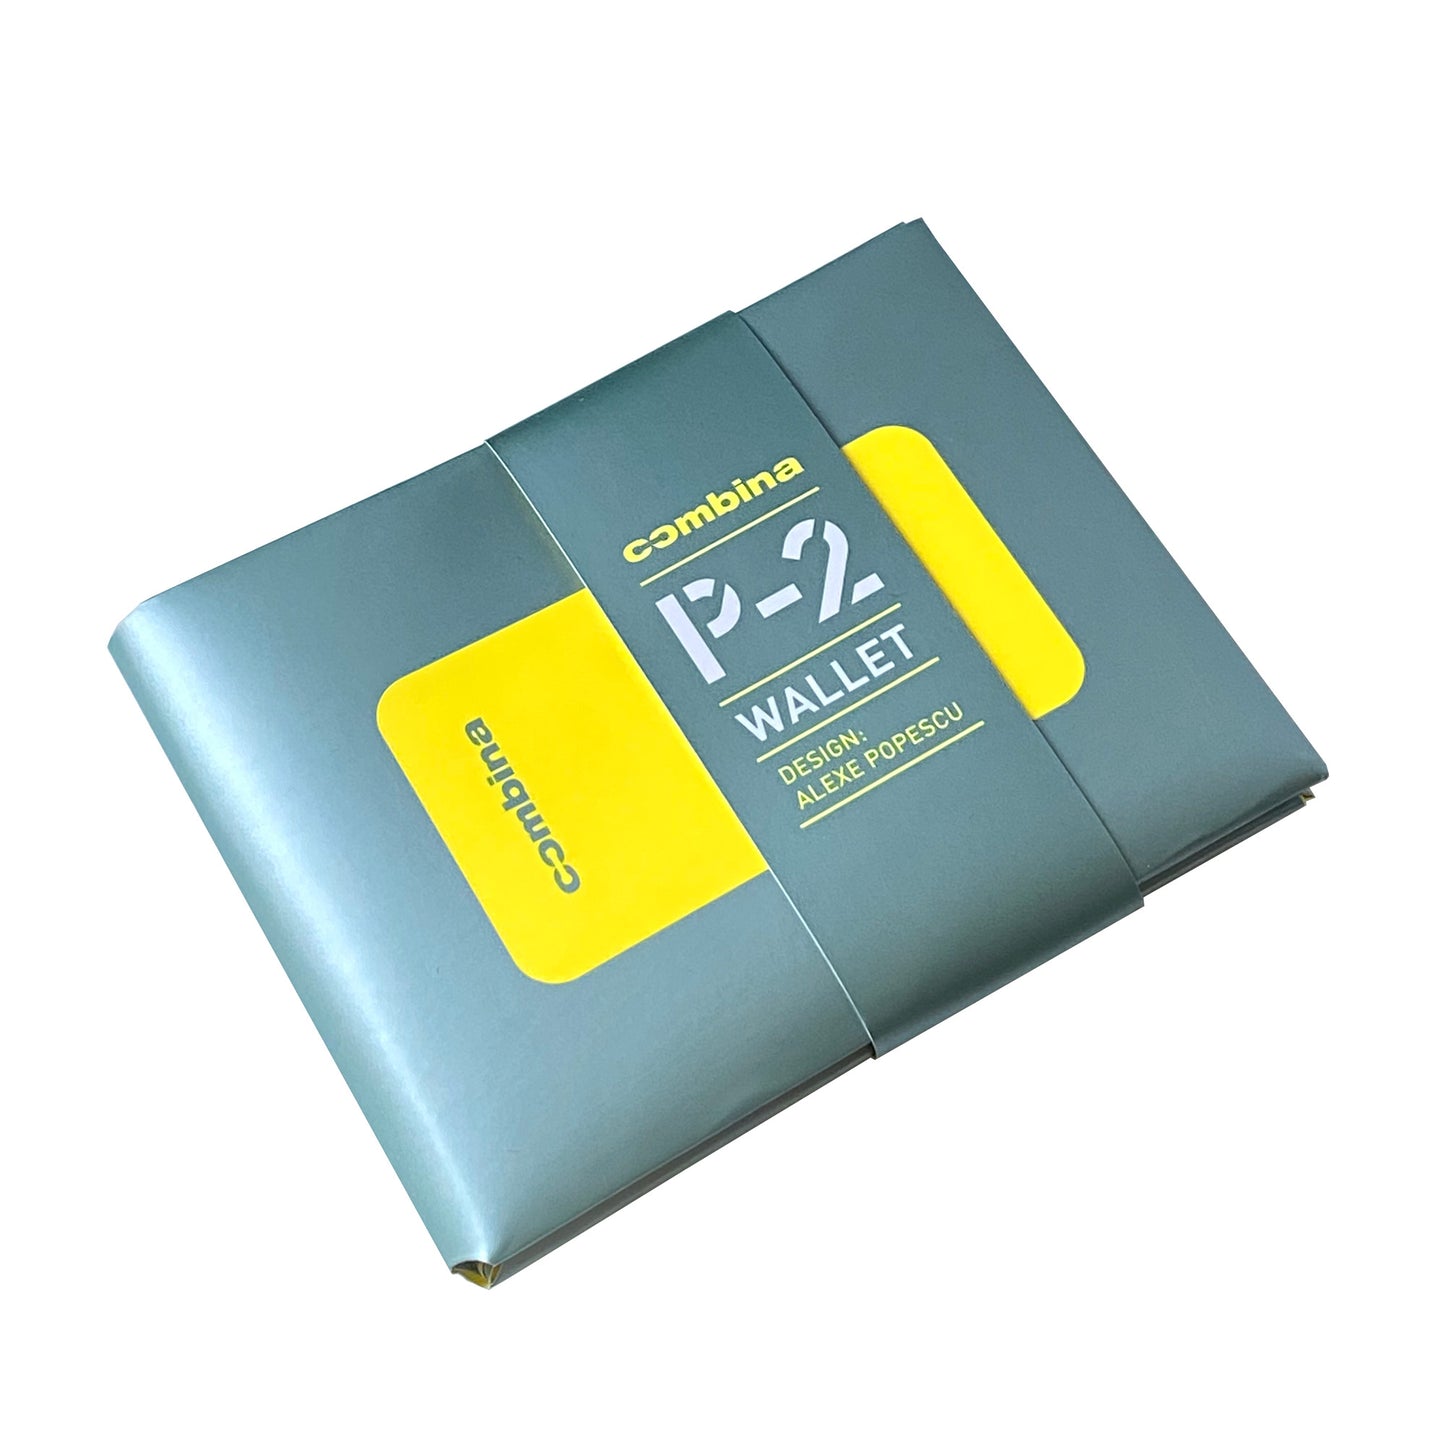 P-2 wallet - 10th Anniversary Edition